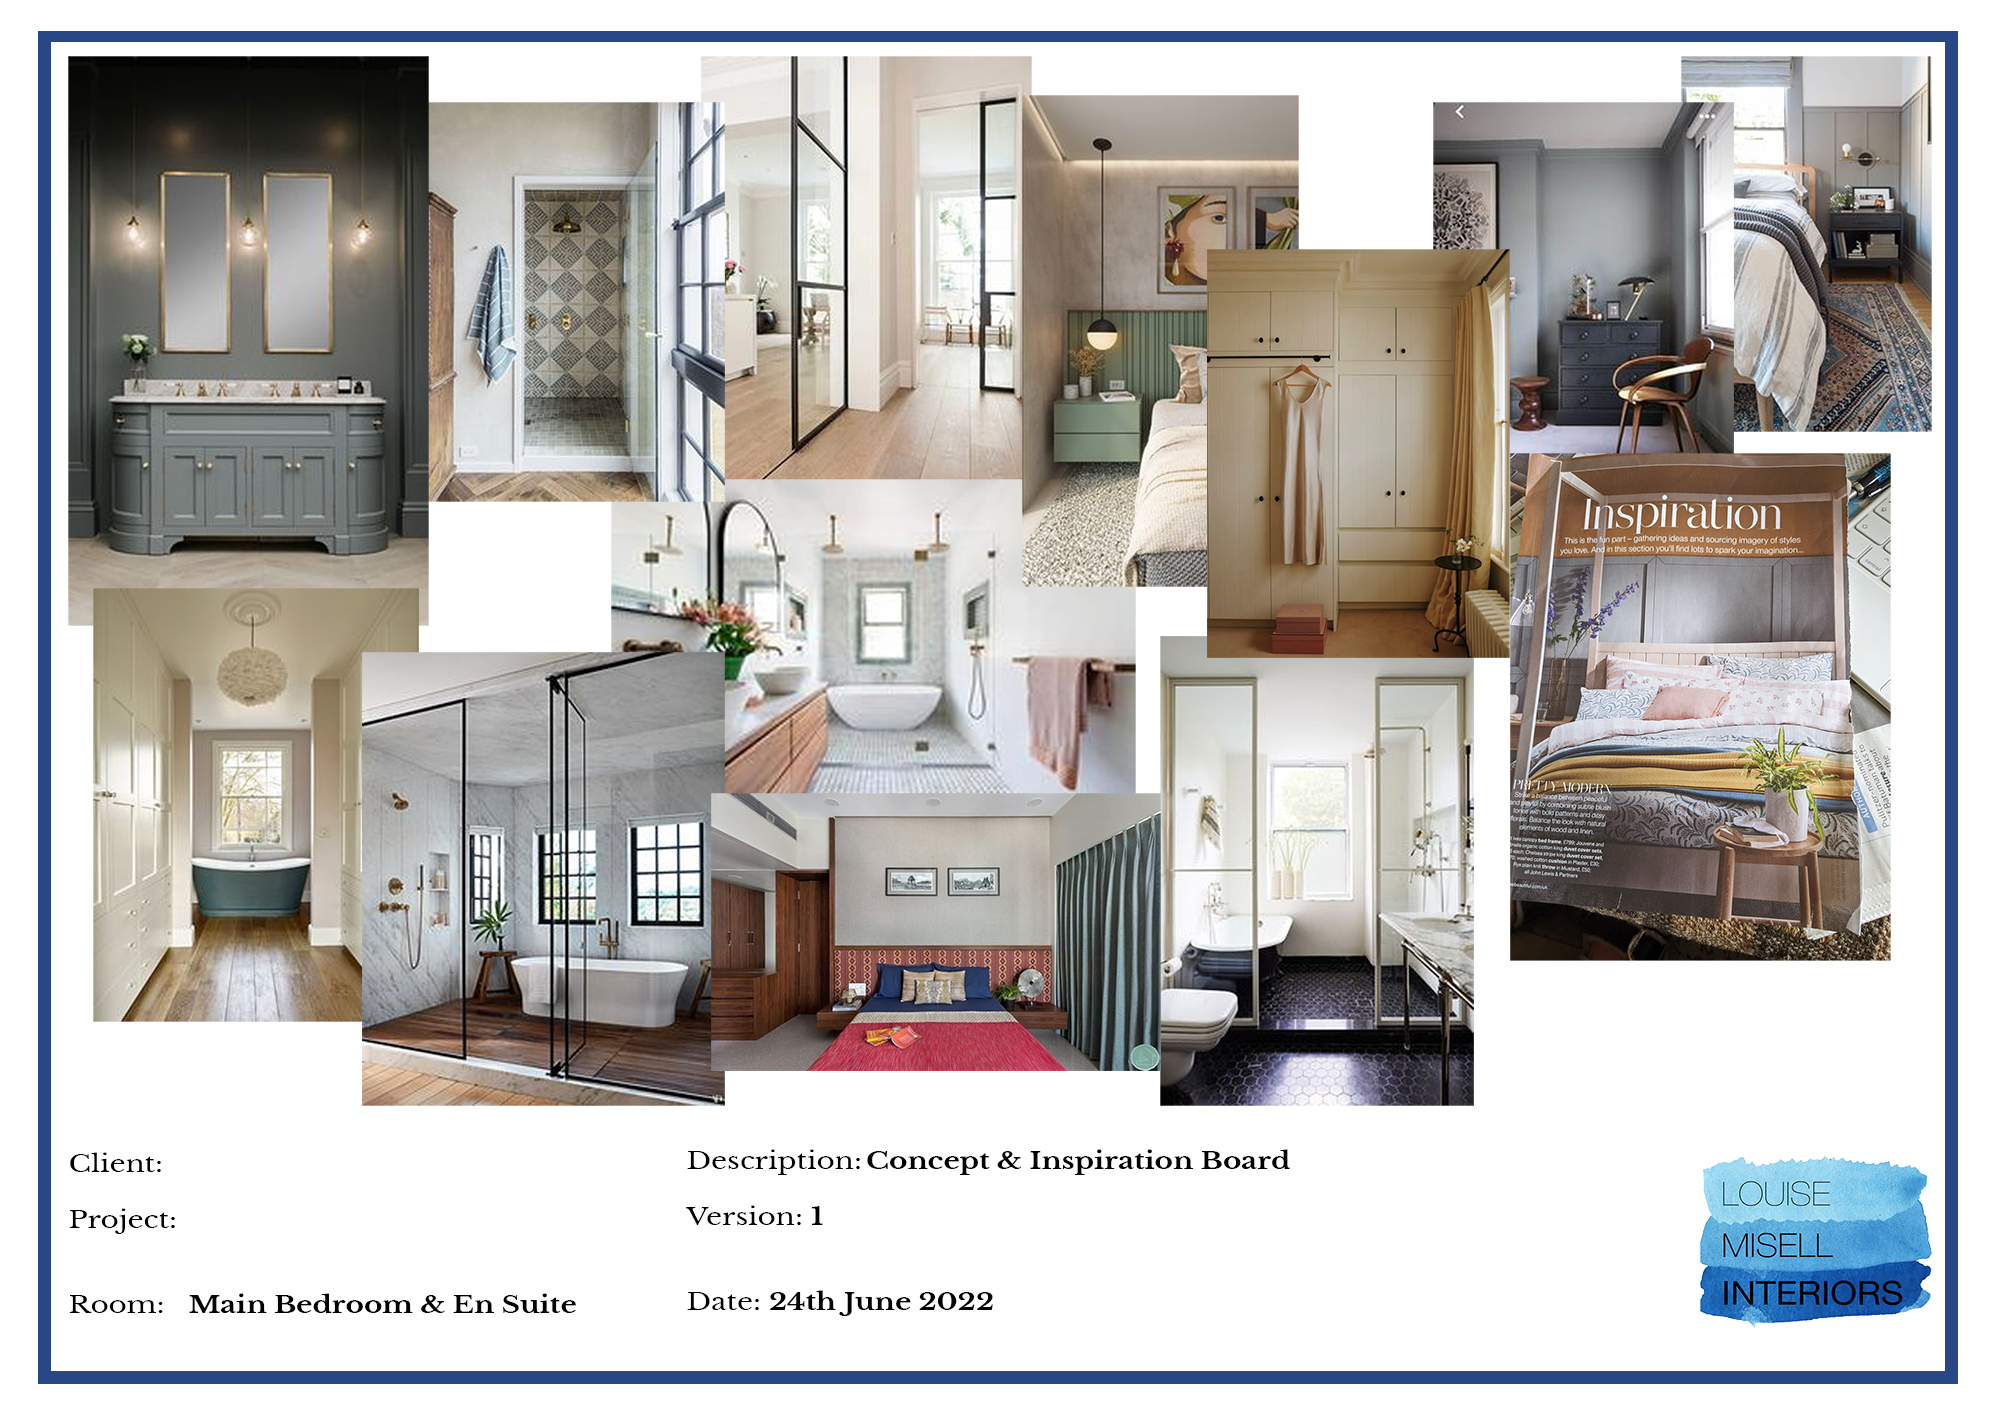 An image showing the design concept board for the client mentioned above.